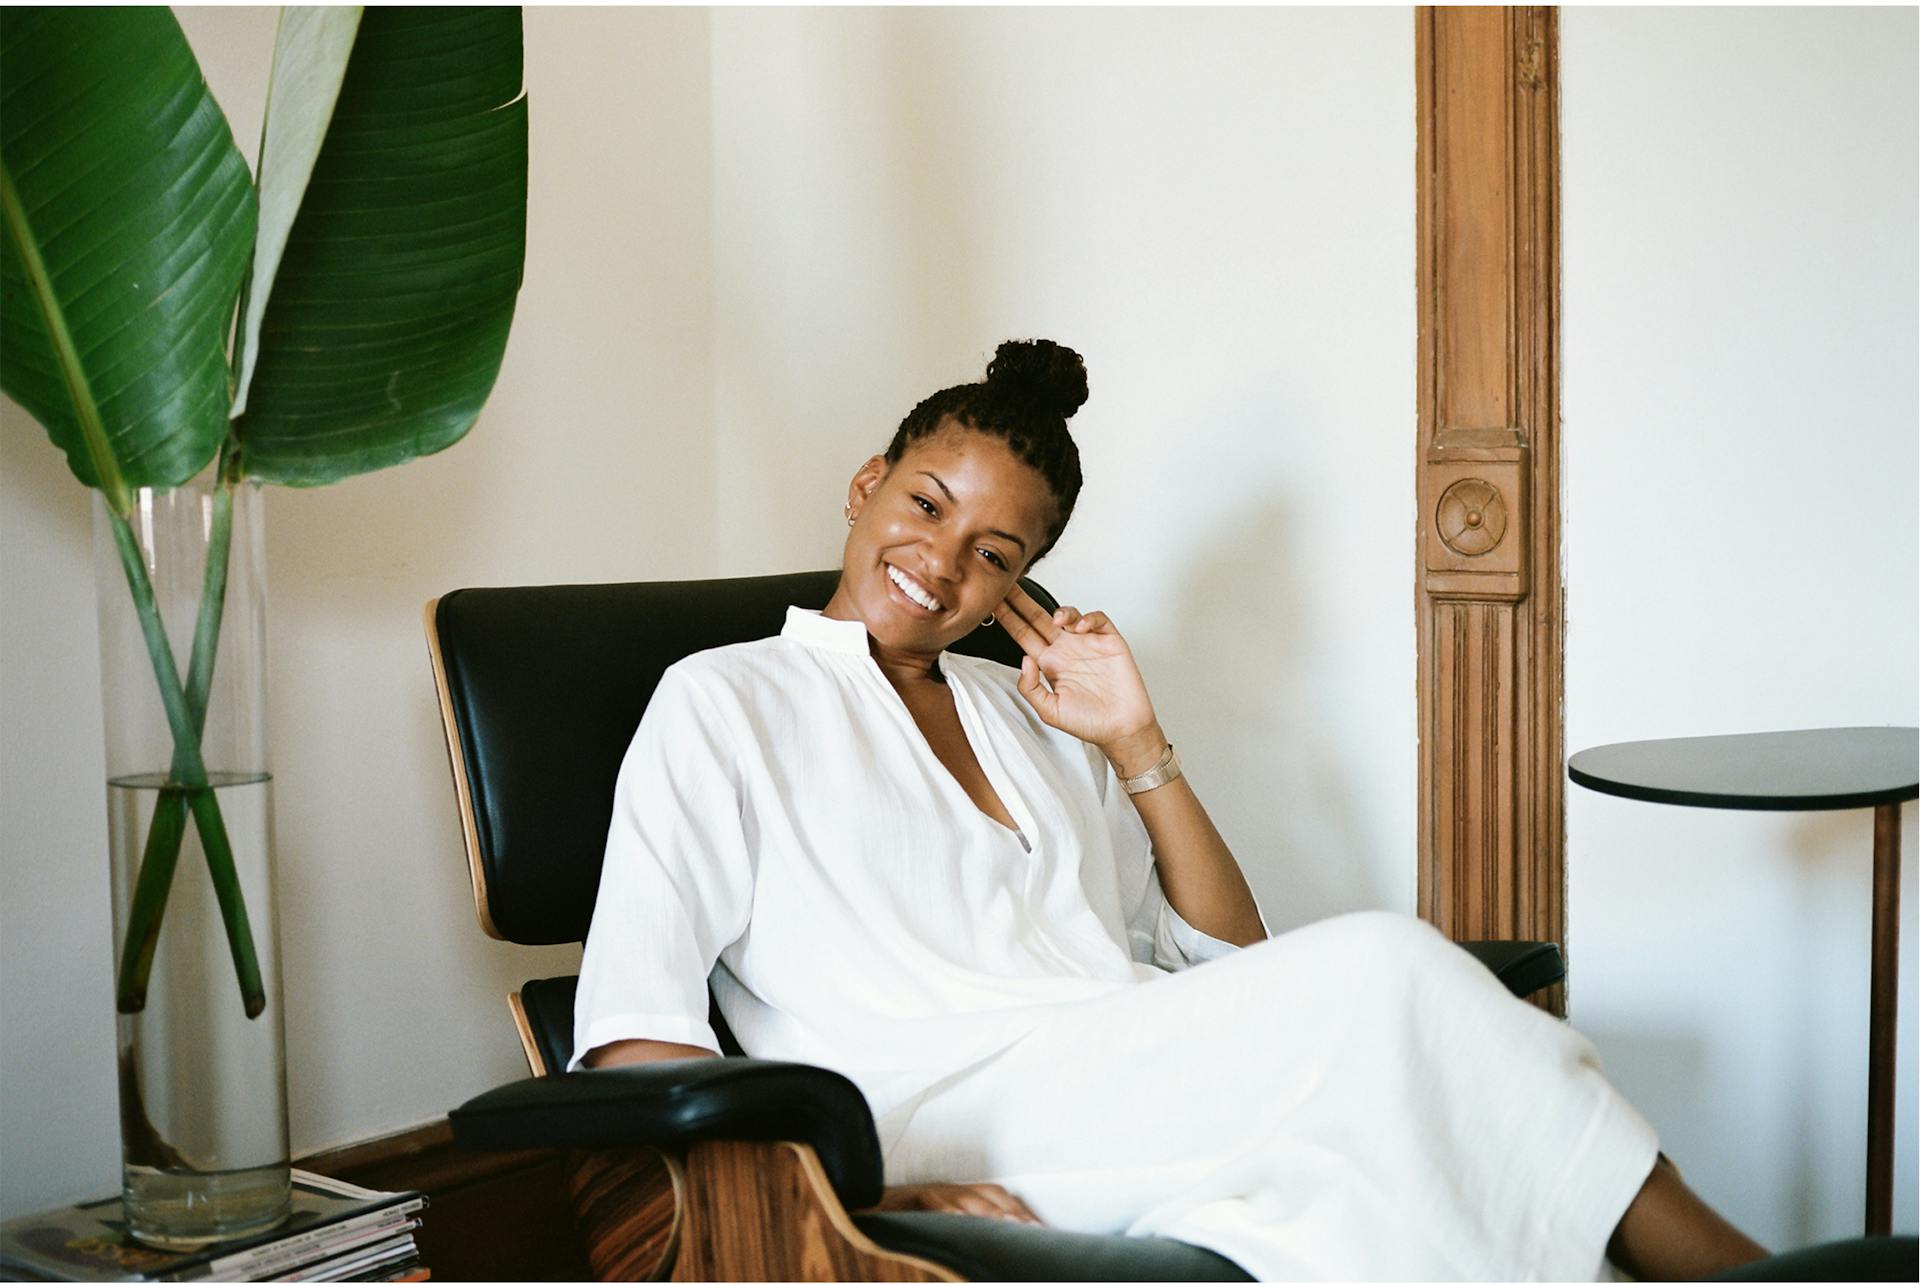 Kai Avent-deLeon wears all white and sits on a chair next to a green house plant